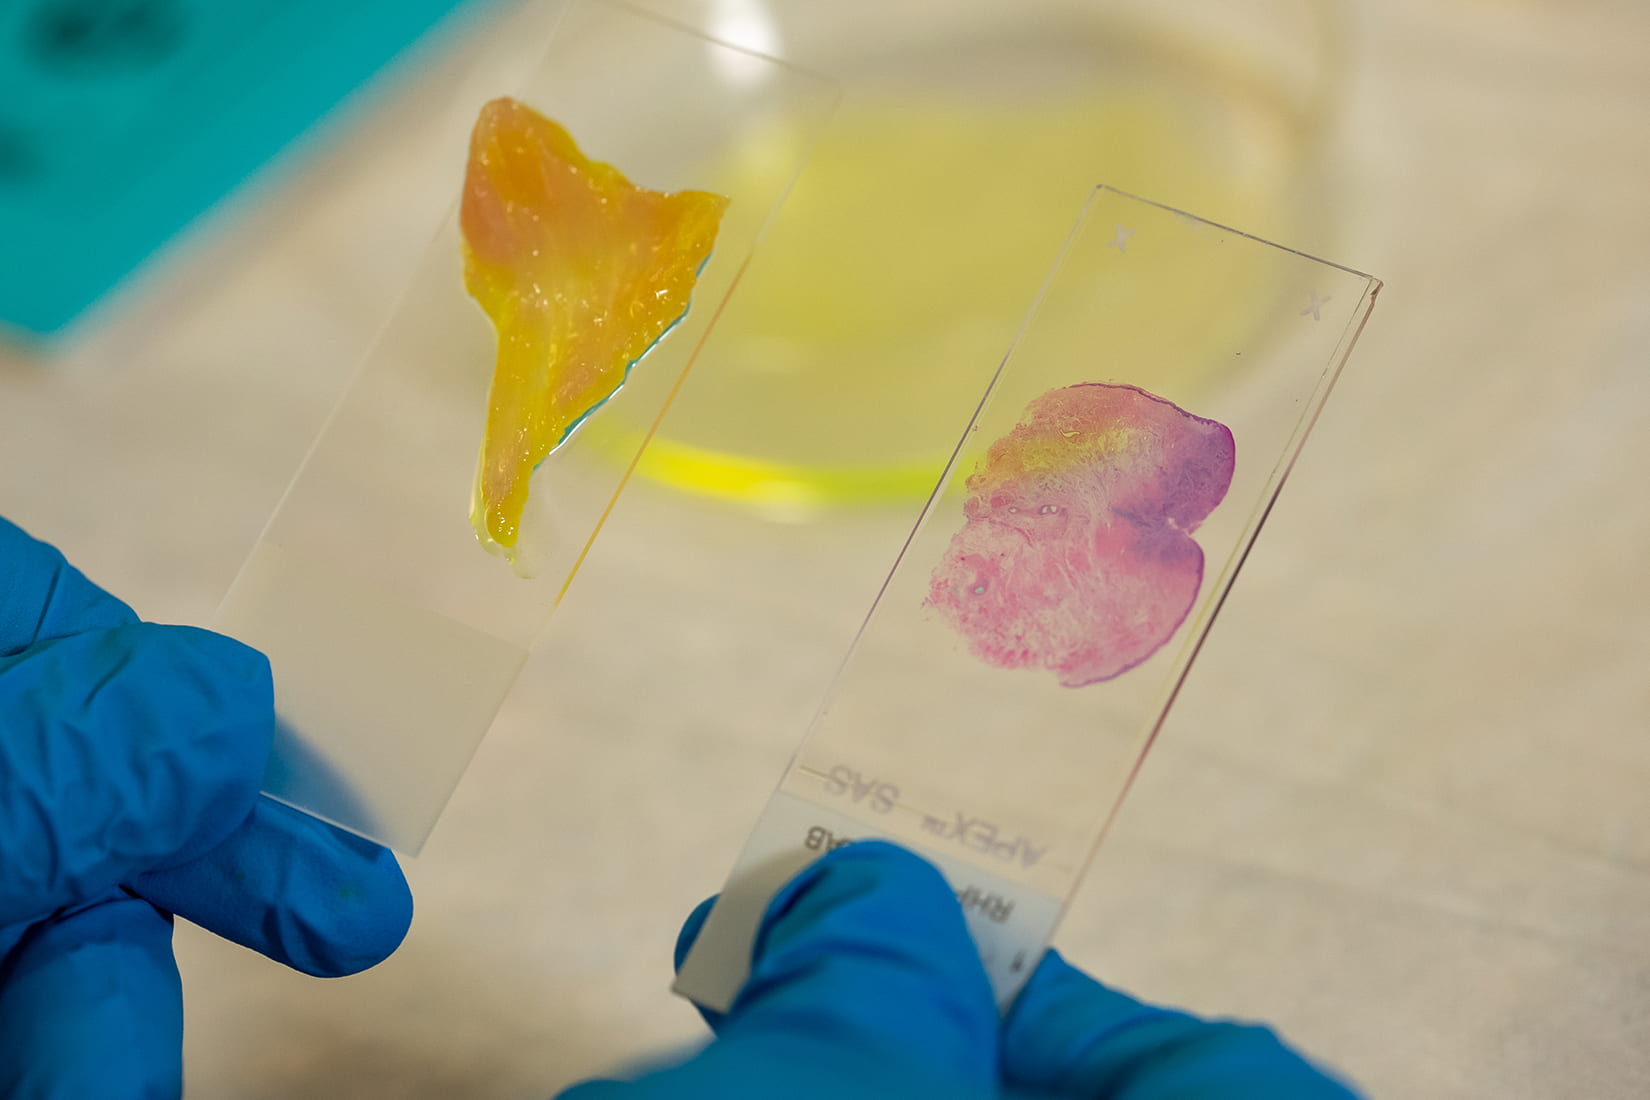 A research holds two slides, one with a yellow sample, the other with a pink sample